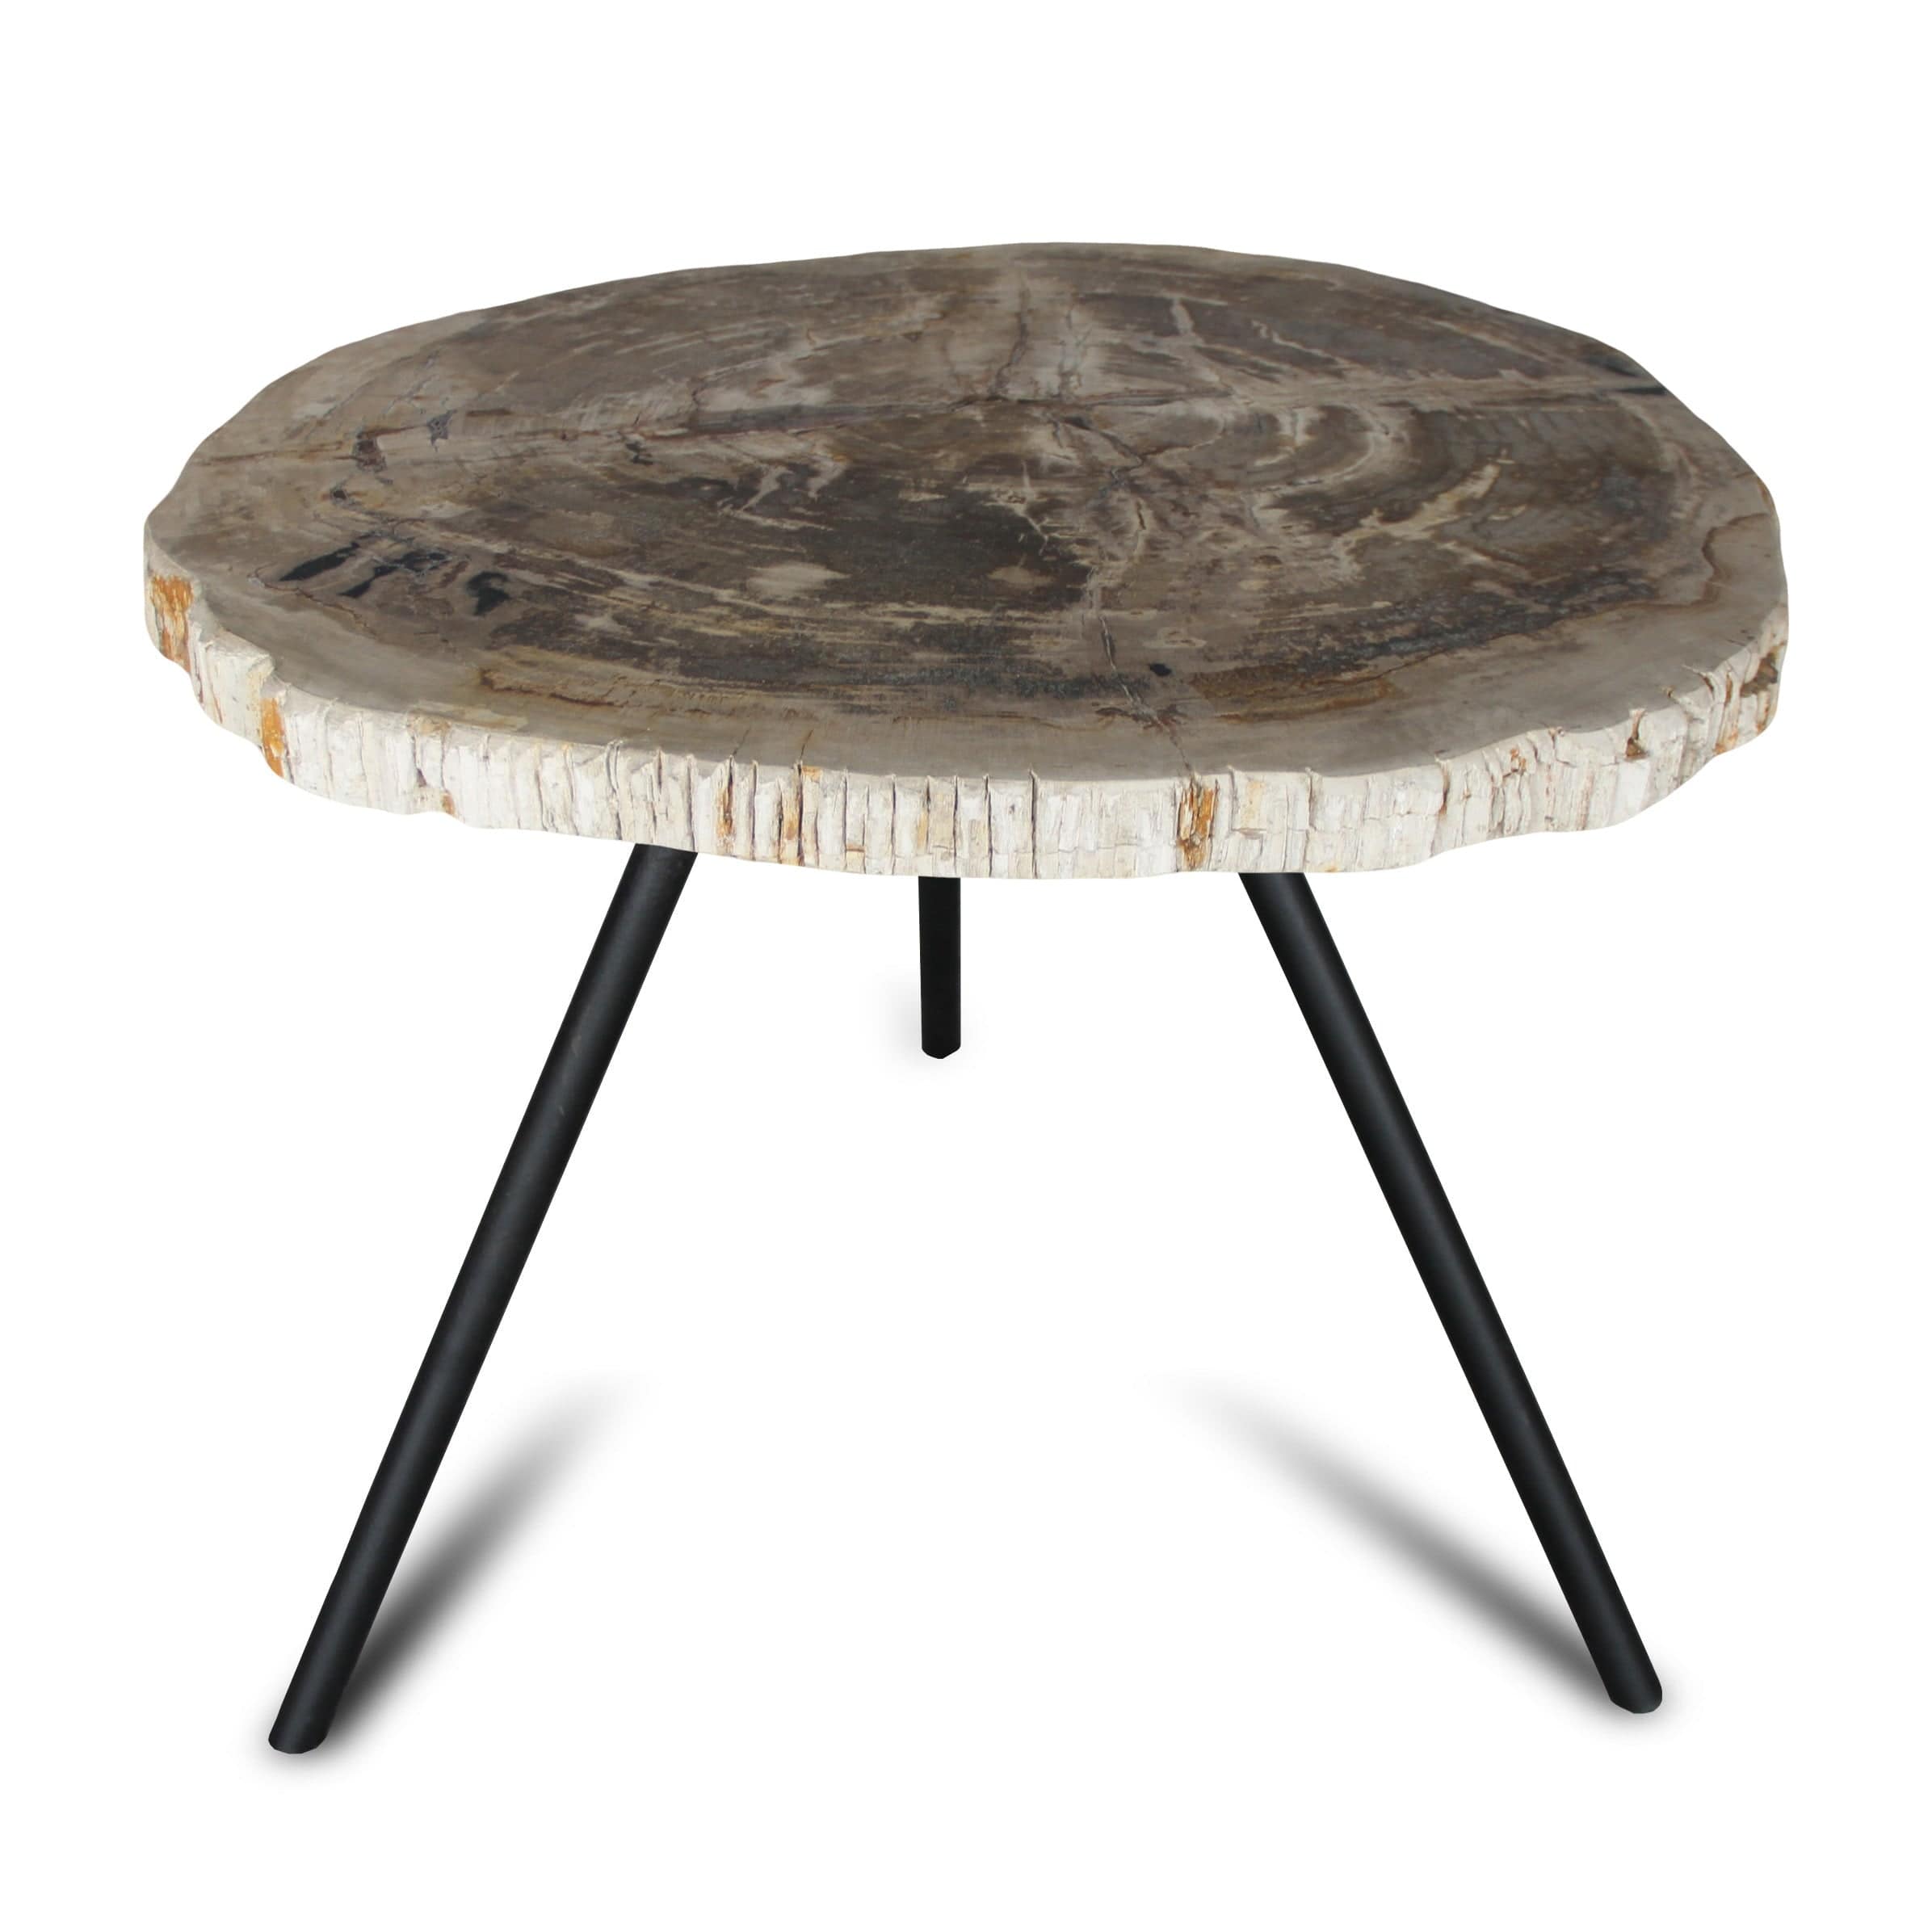 Kalifano Petrified Wood Petrified Wood Round Slice Side Table from Indonesia - 26" / 66 lbs PWT2400.004